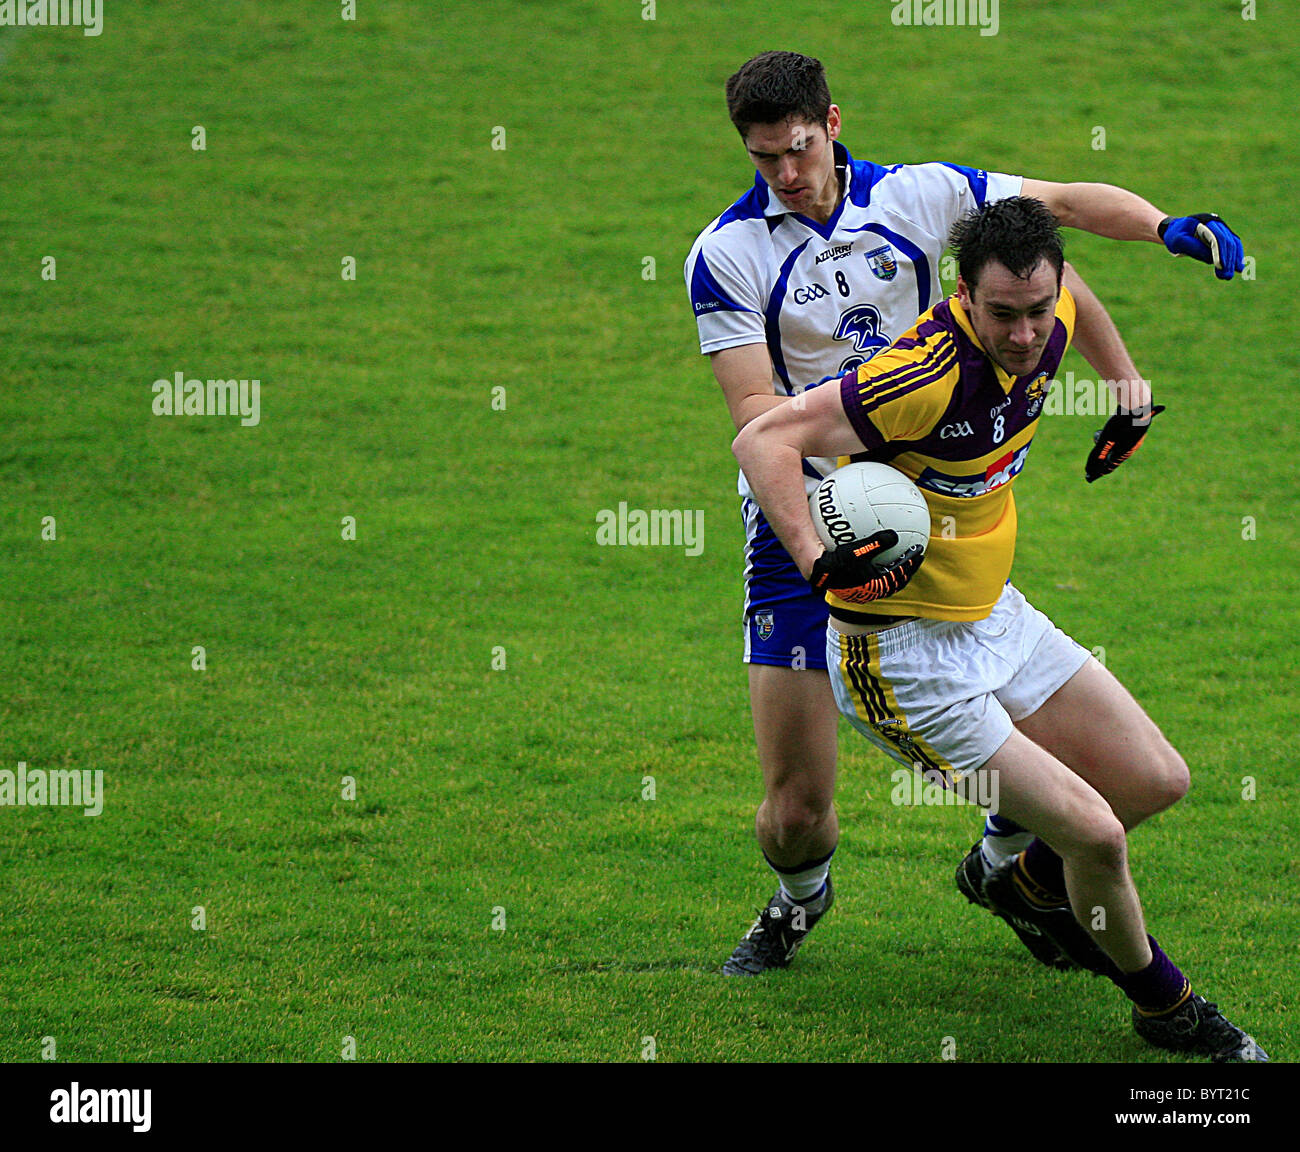 Wexfords Daithi Waters in action against Brian Phelan of Waterford. Wexford Vs Waterford, Allianz Football League Division 3 Rou Stock Photo